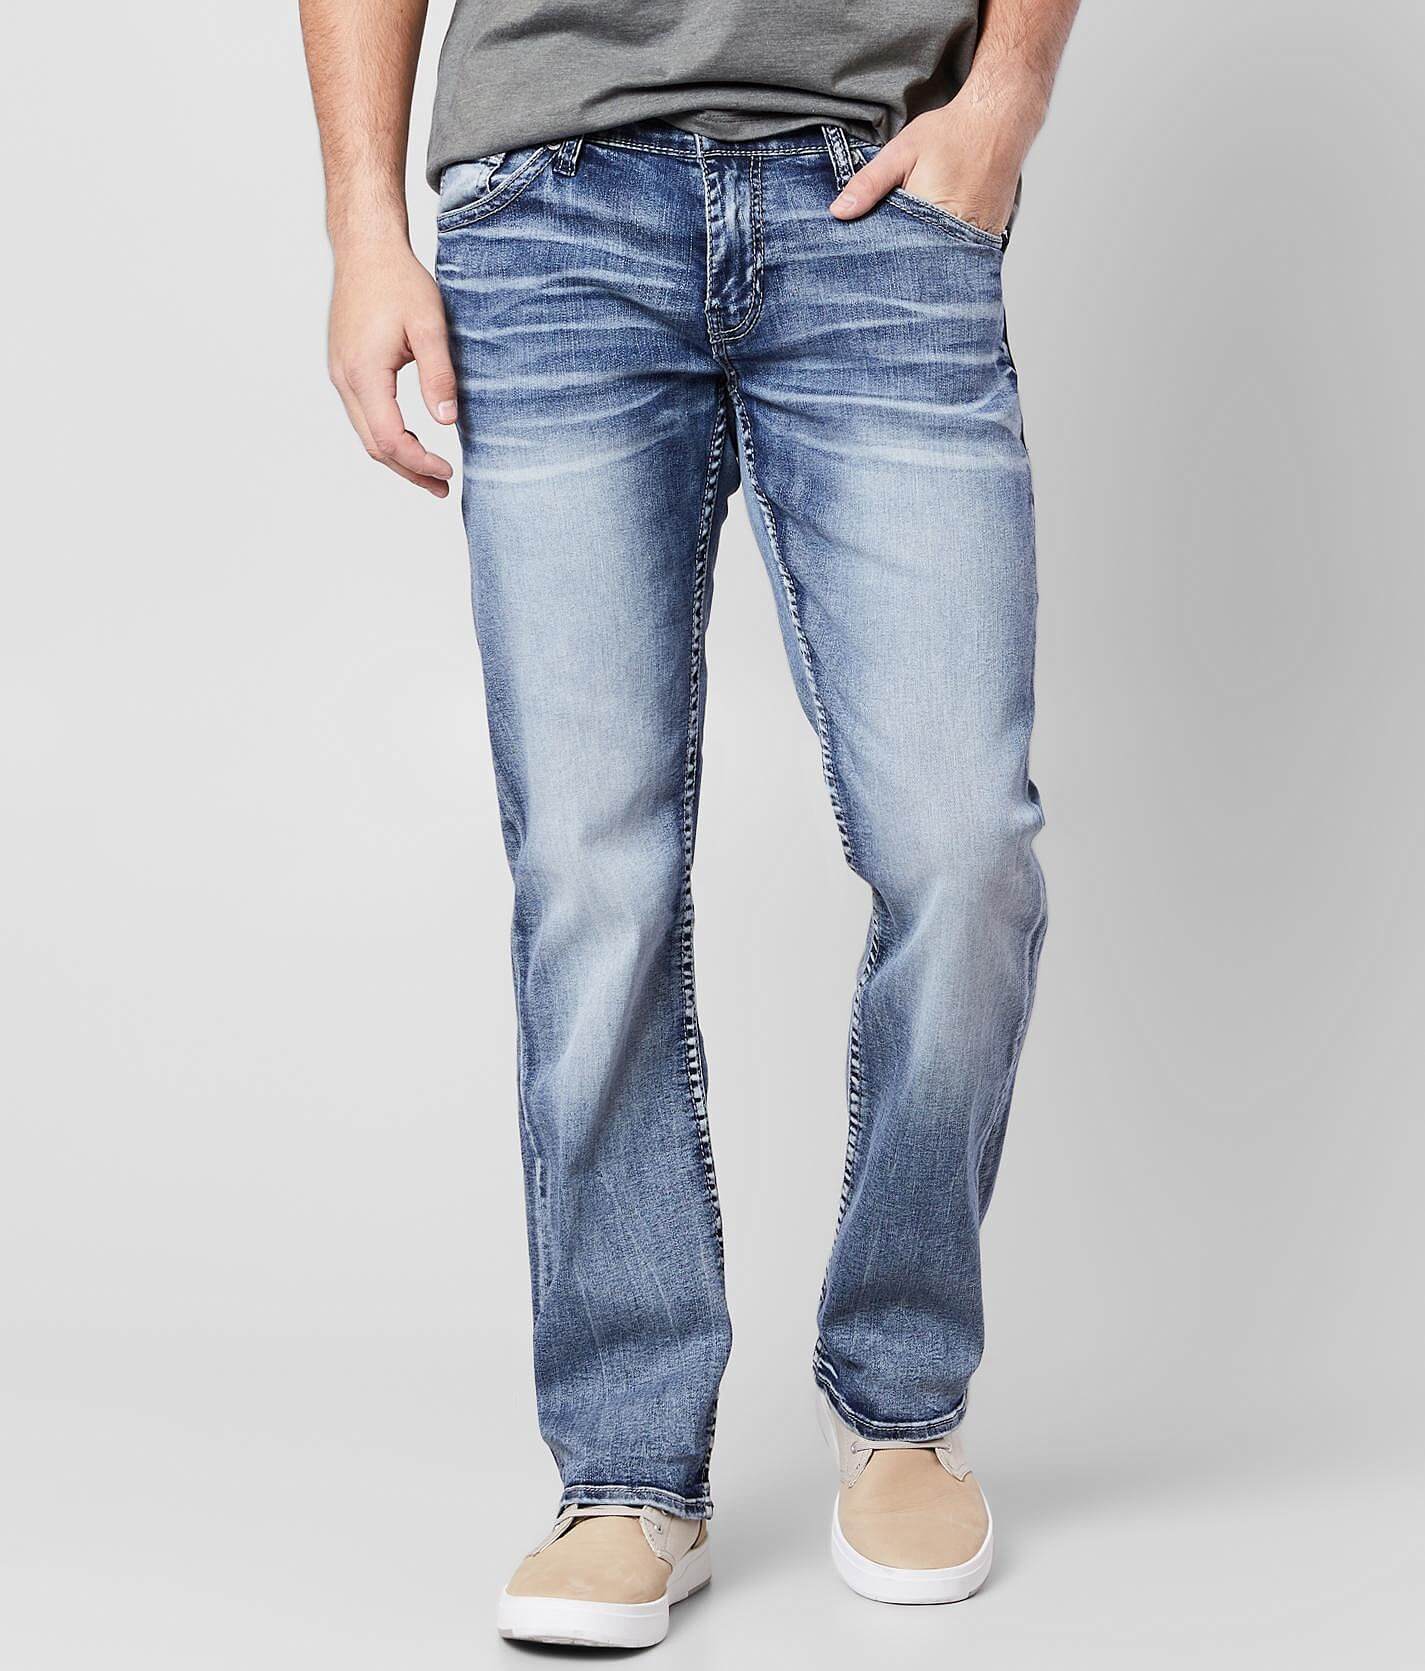 buckle jeans for sale mens